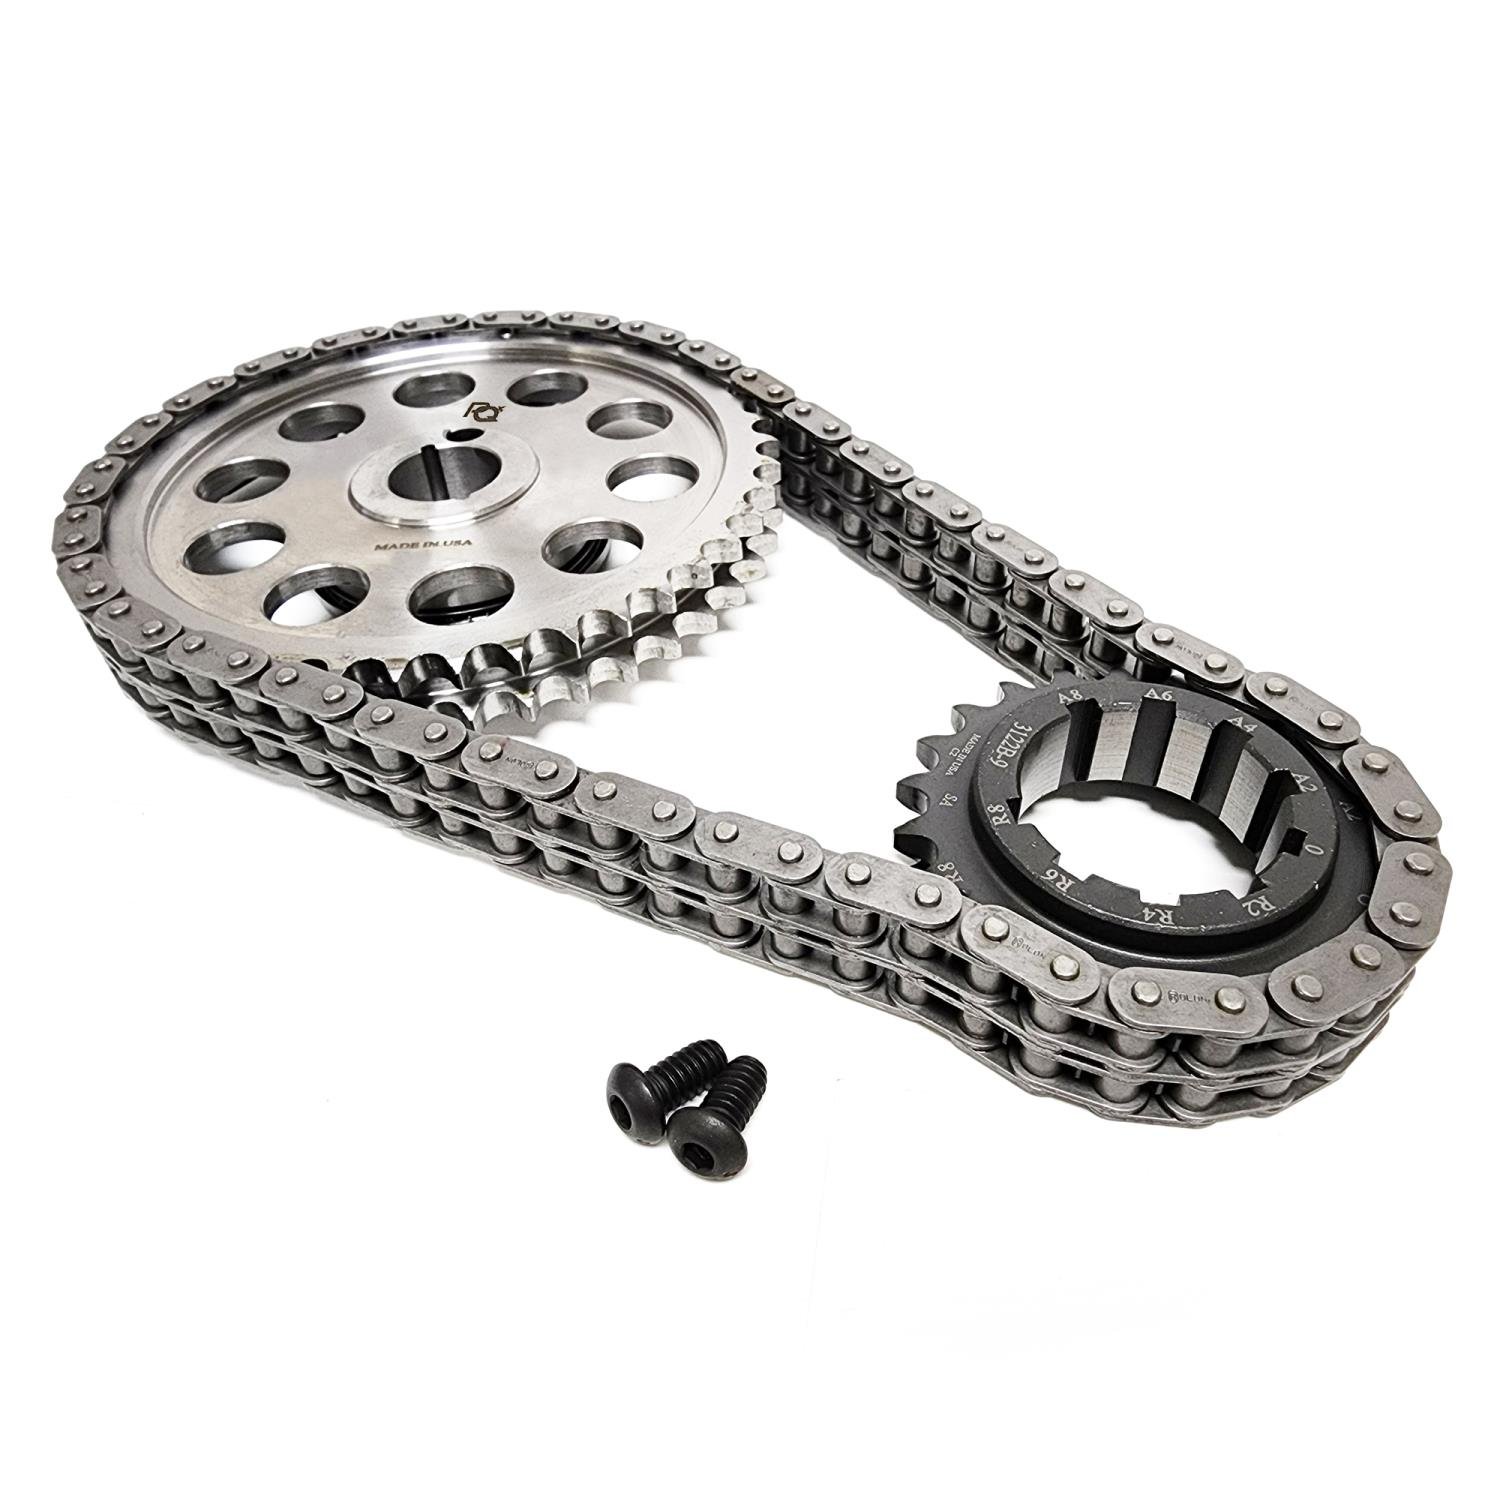 Double-Roller Timing Chain and Gear Set for Big Block Ford 429/460 V8